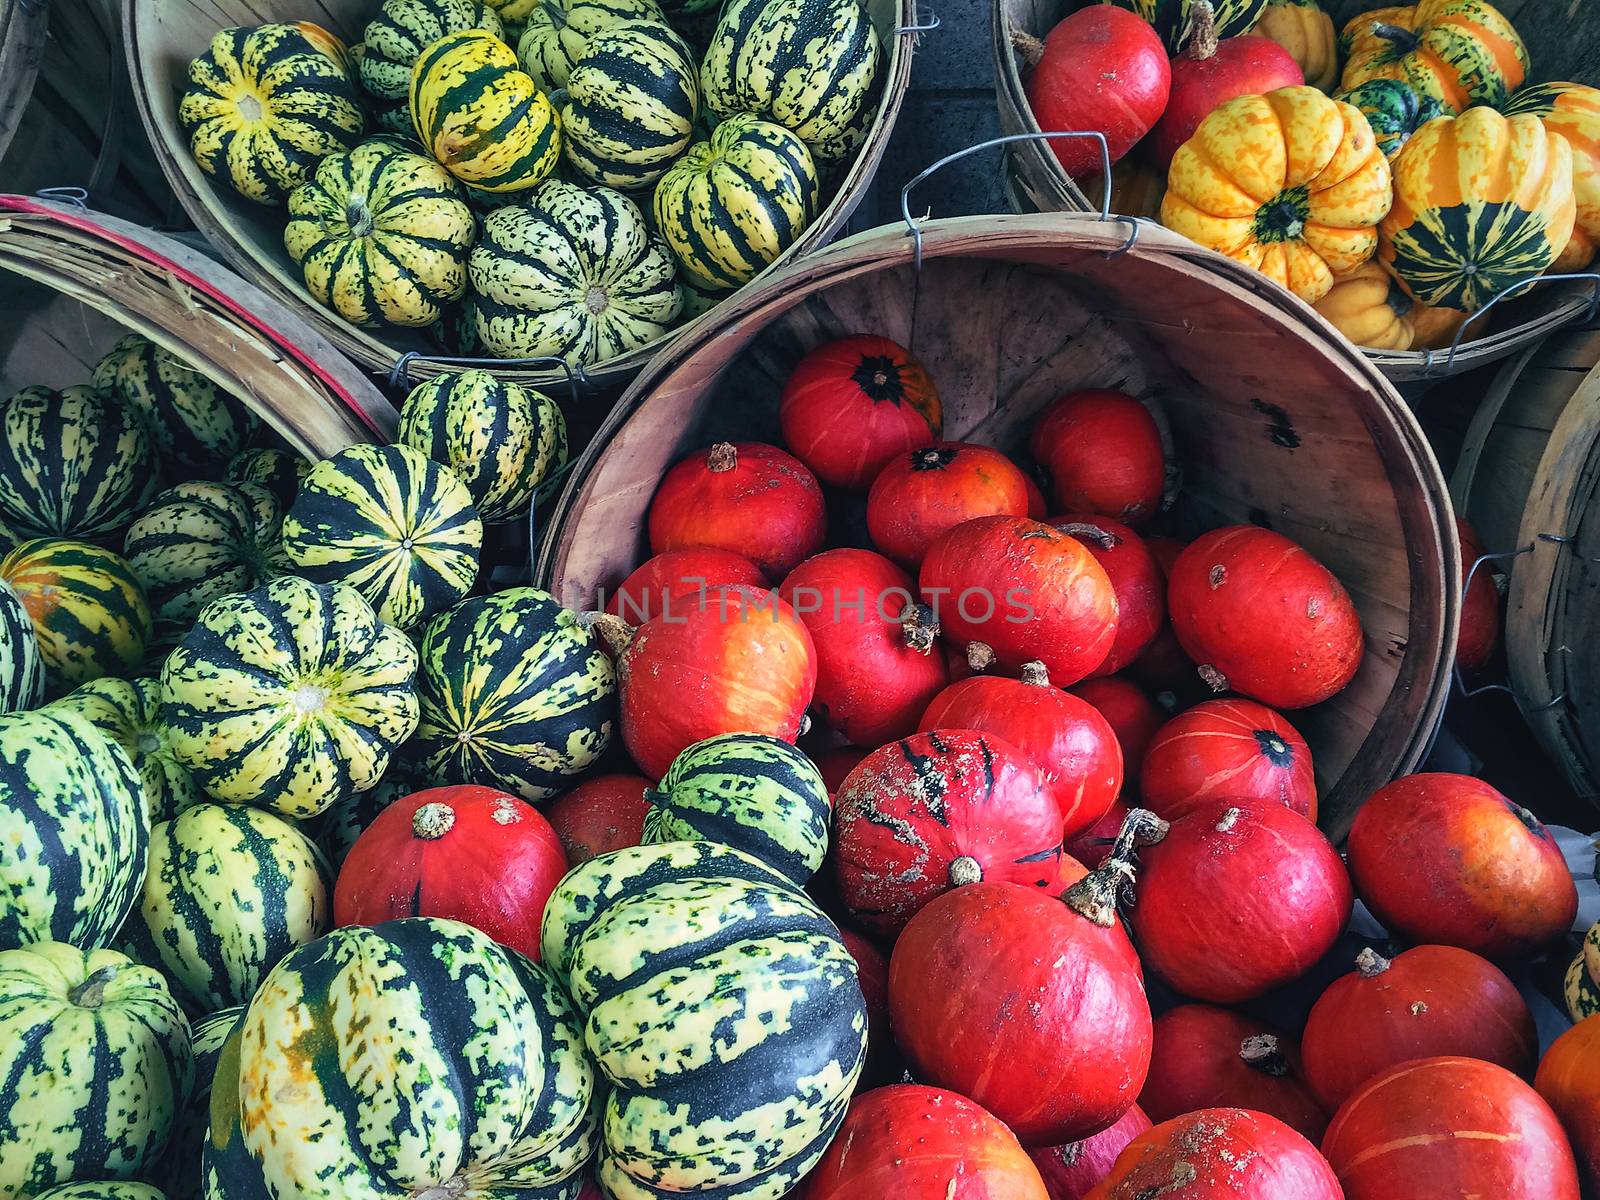 Variety of colorful squashes at the market. Autumn vegetables.